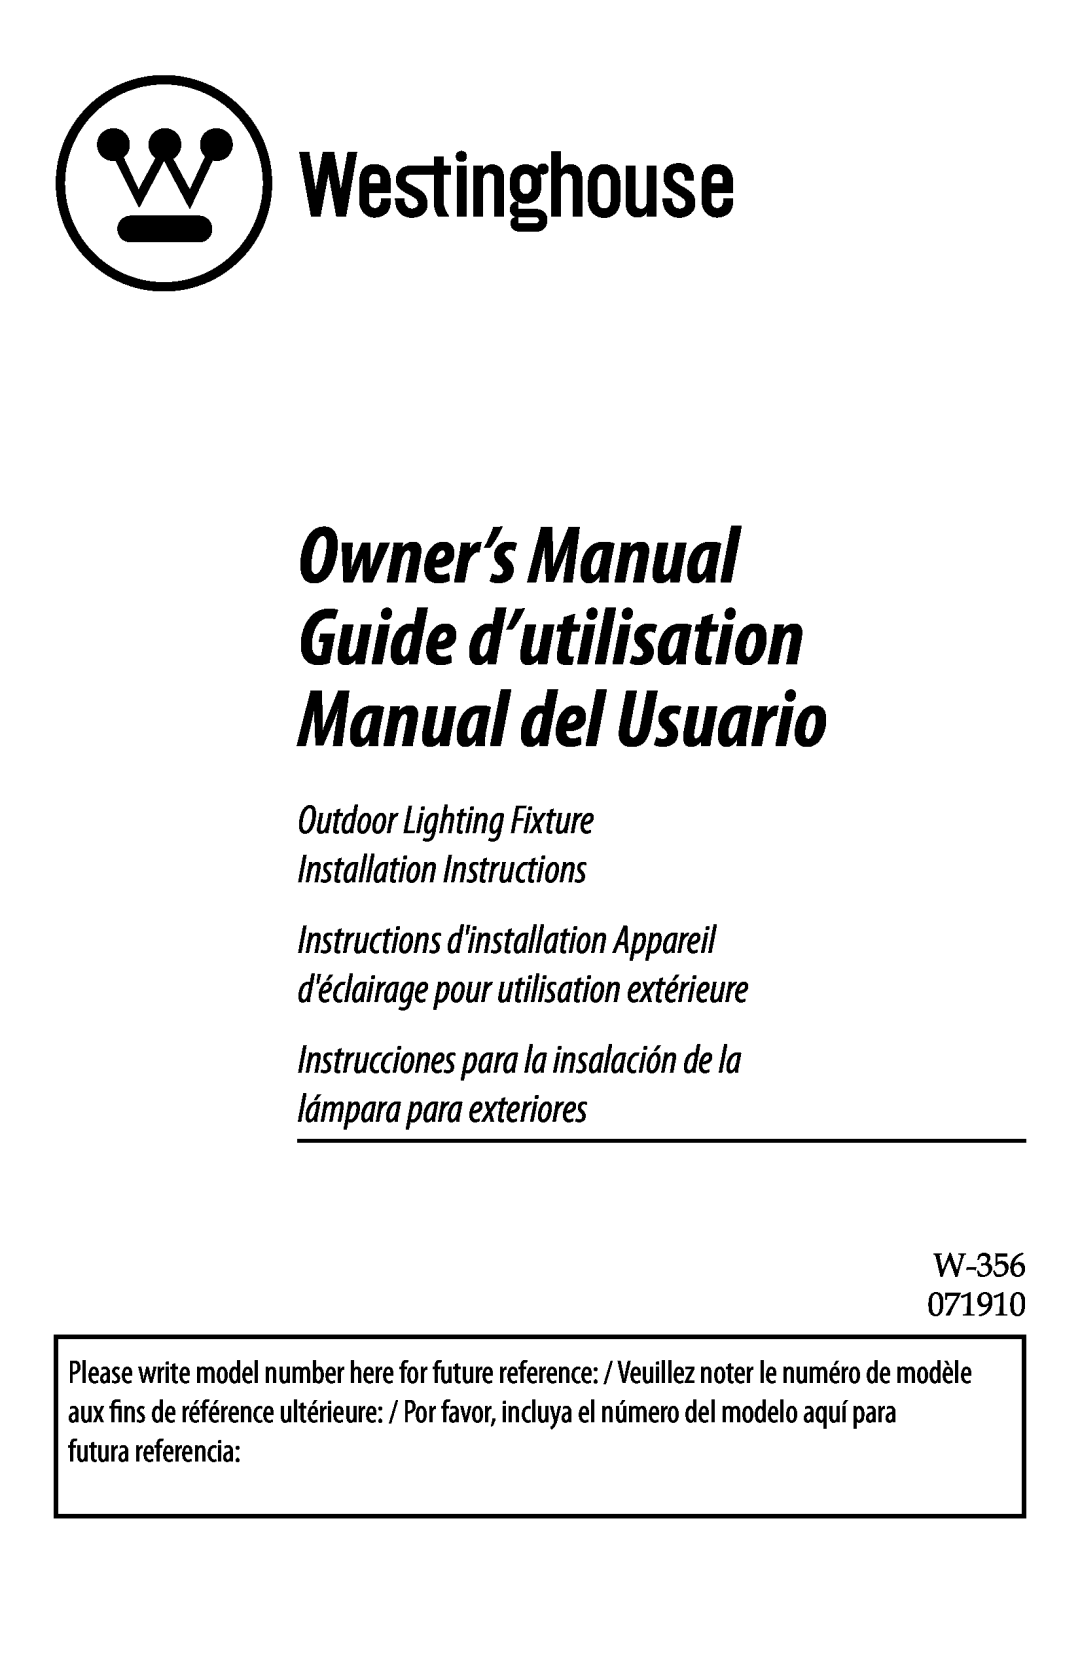 Westinghouse 71910 owner manual Outdoor Lighting Fixture Installation Instructions 